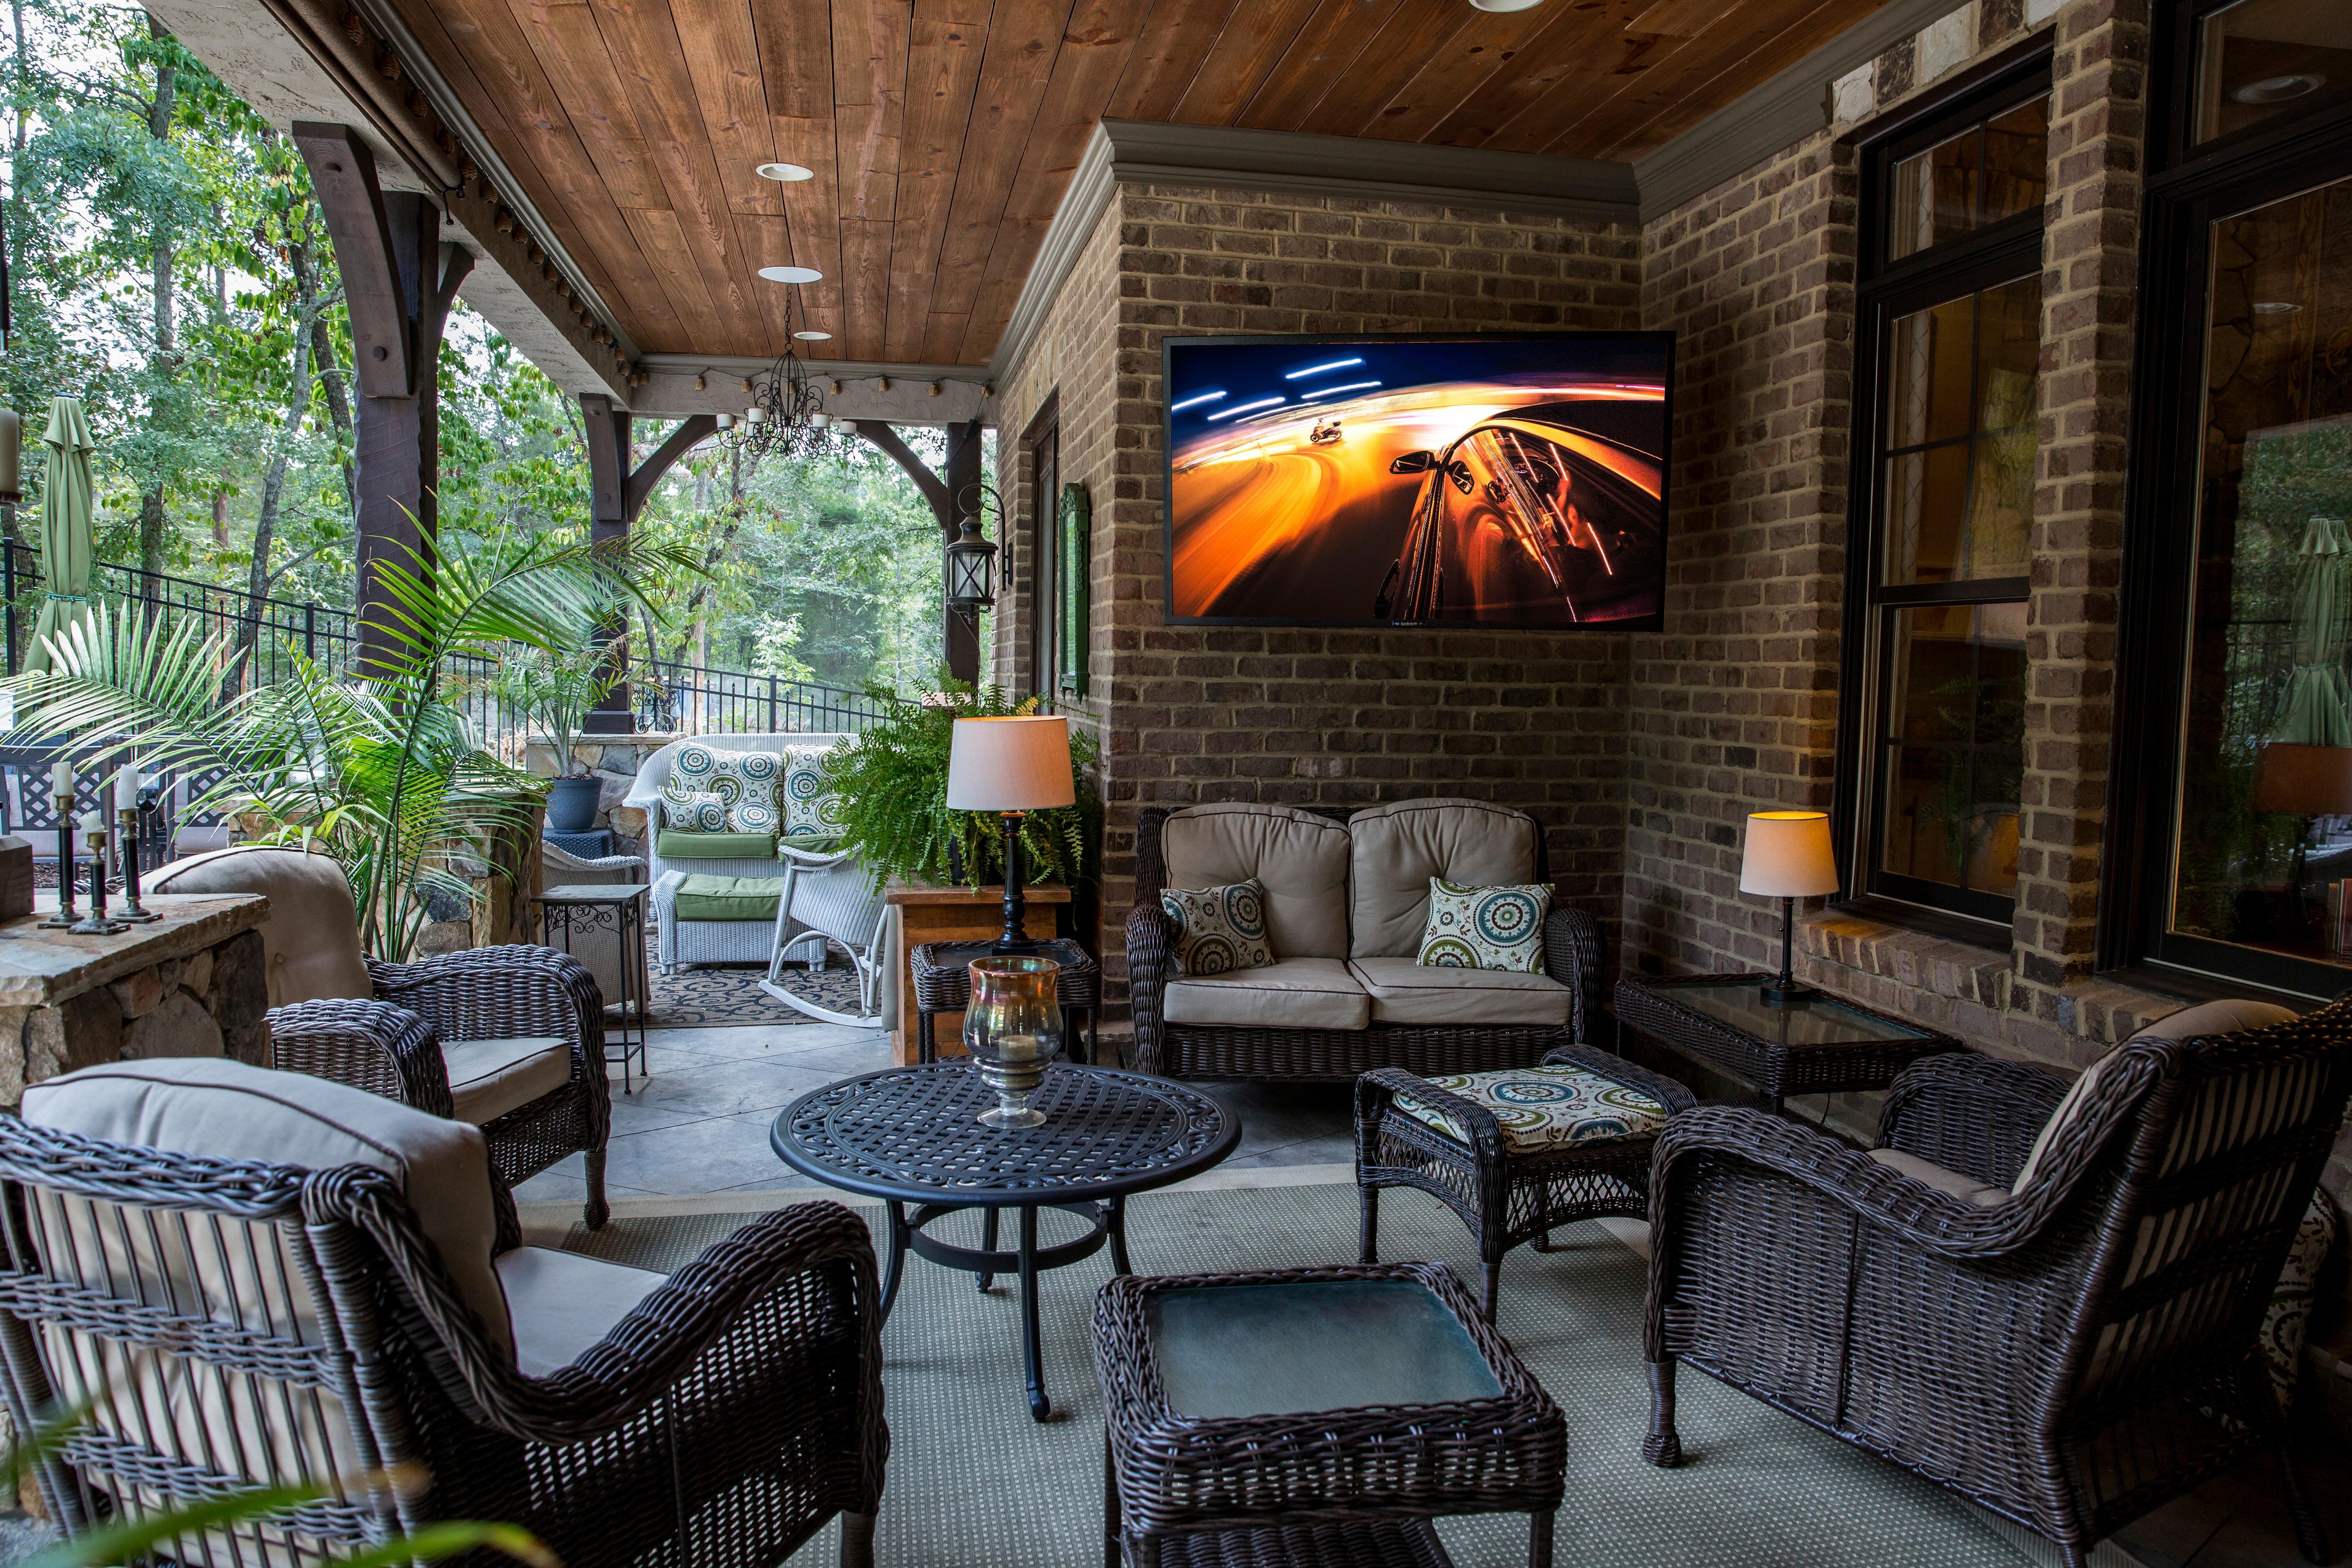 Enhance Your Outdoor Lifestyle With a SunBriteTV